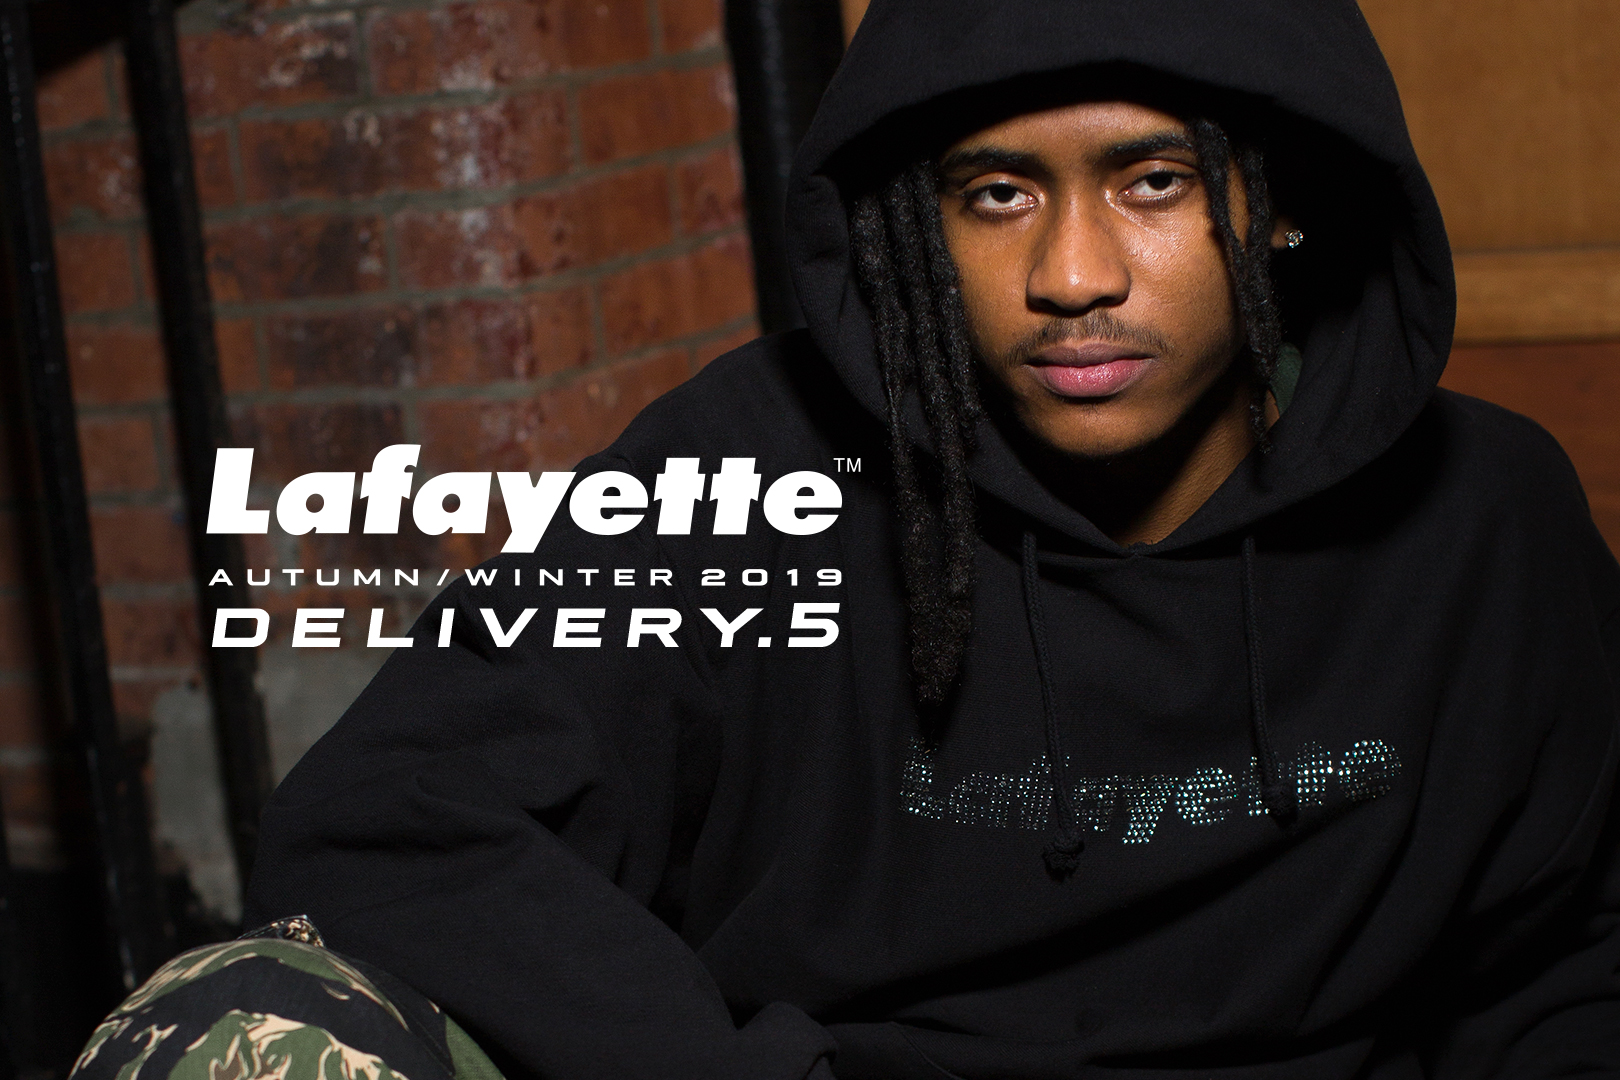 Lafayette 2019 Autumn/Winter Collection Delivery.5